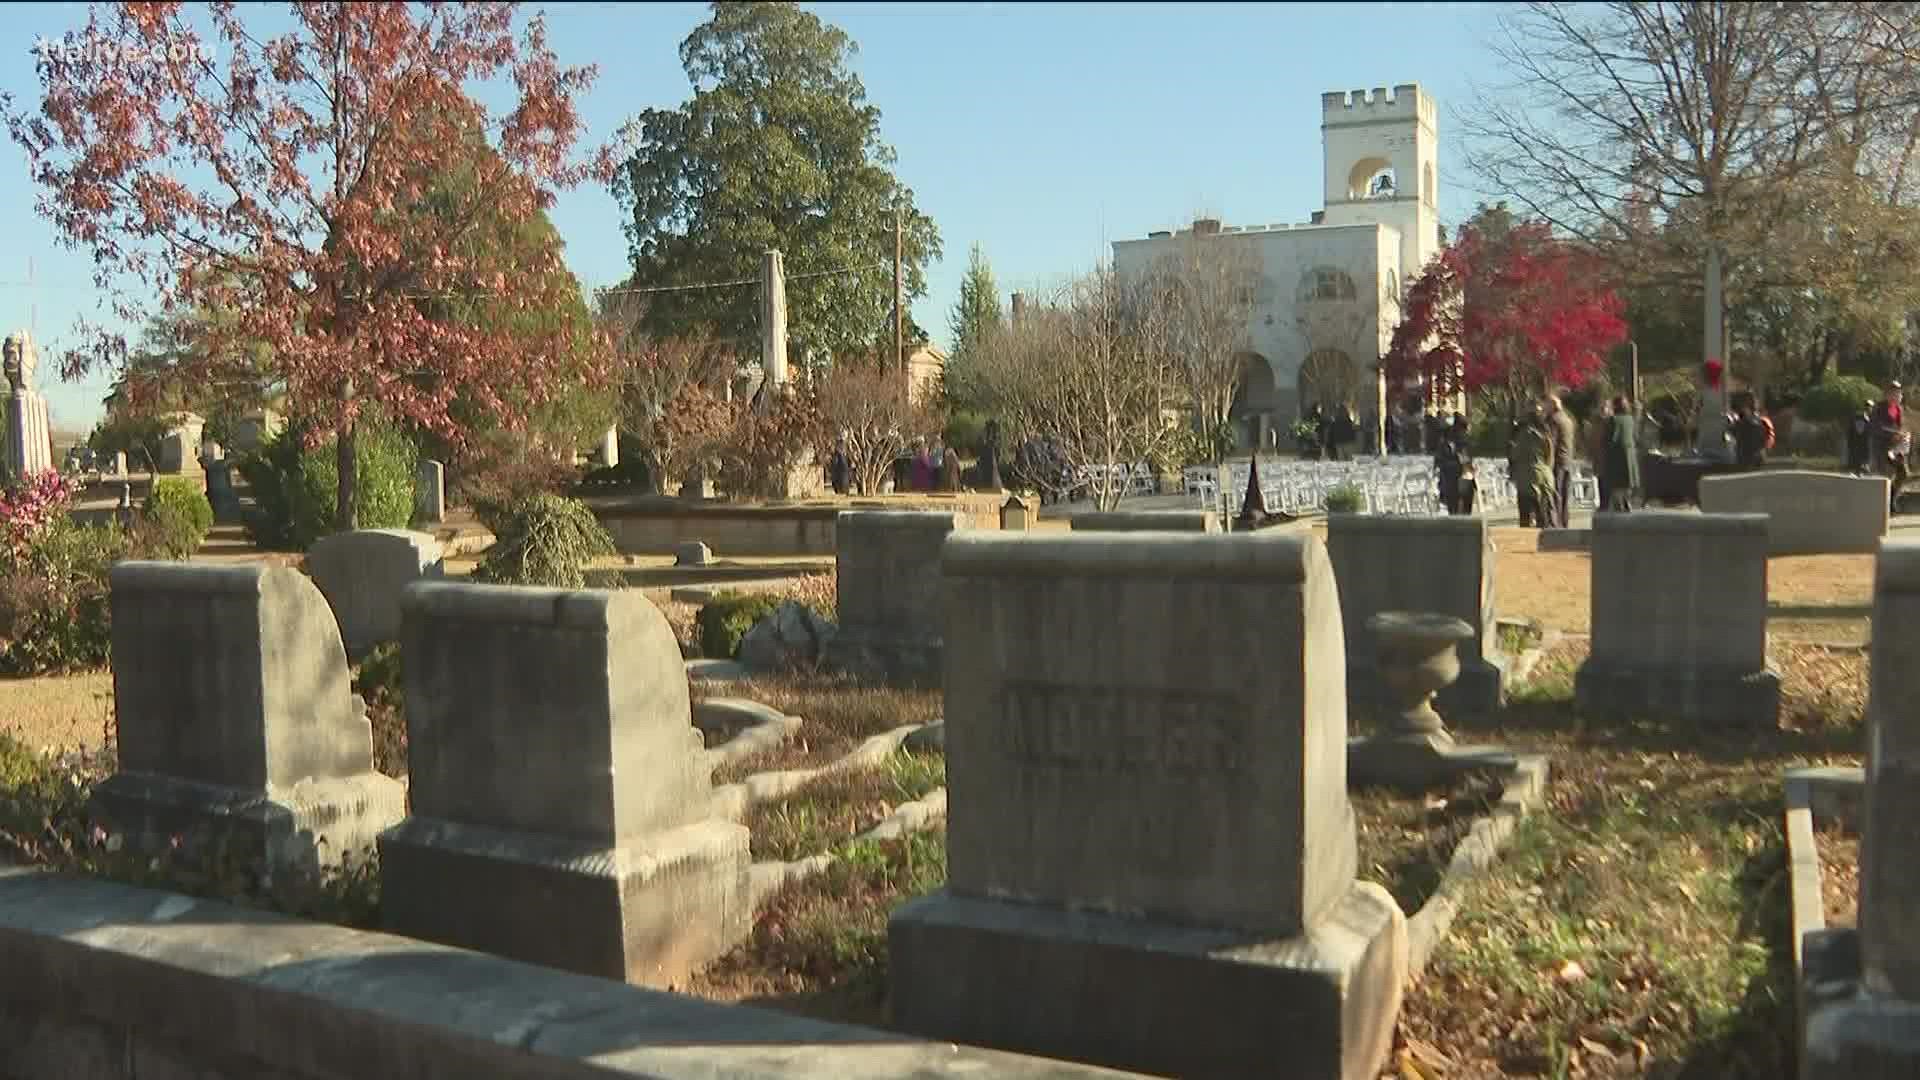 Oakland Cemetery serves as the final resting place for over 70,000 Georgians.